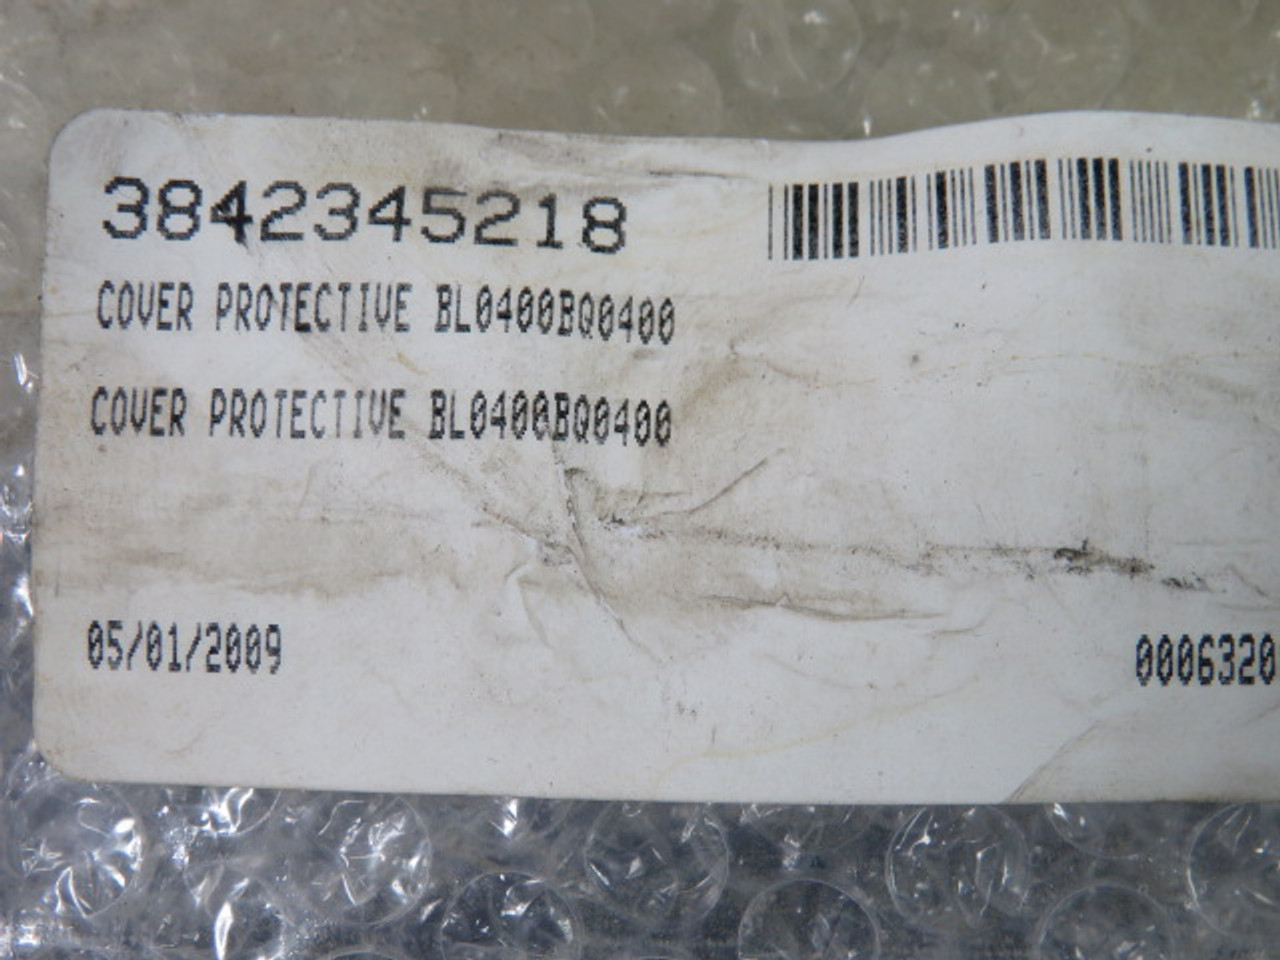 Bosch 3-842-345-218 Protective Cover ! NWB !